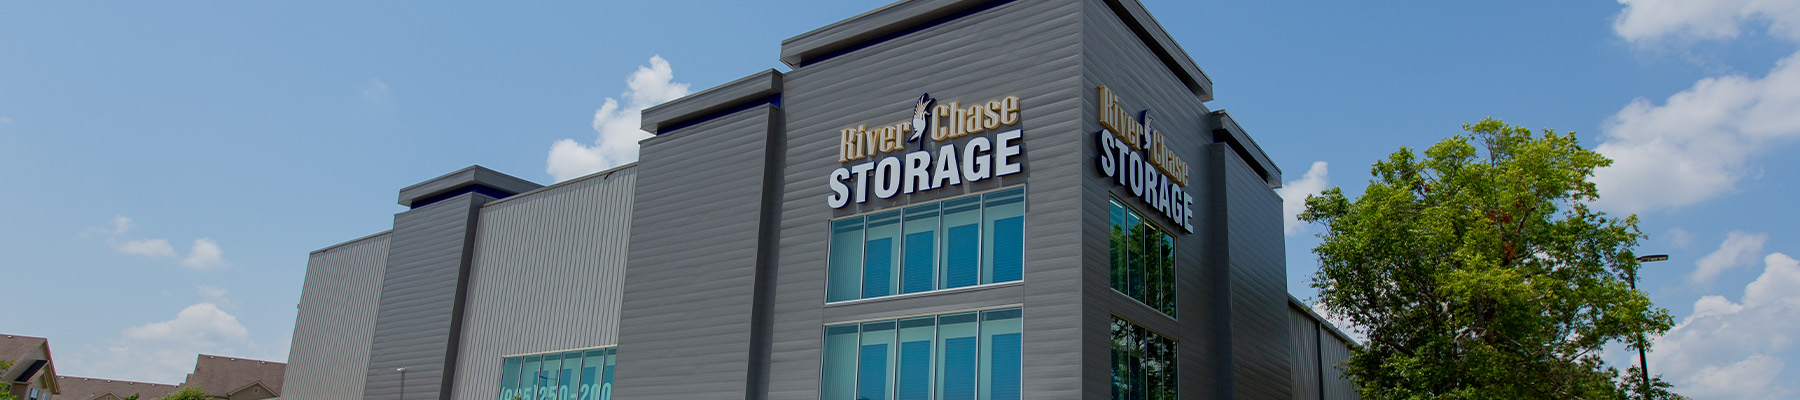 River Chase Self Storage Contact Us